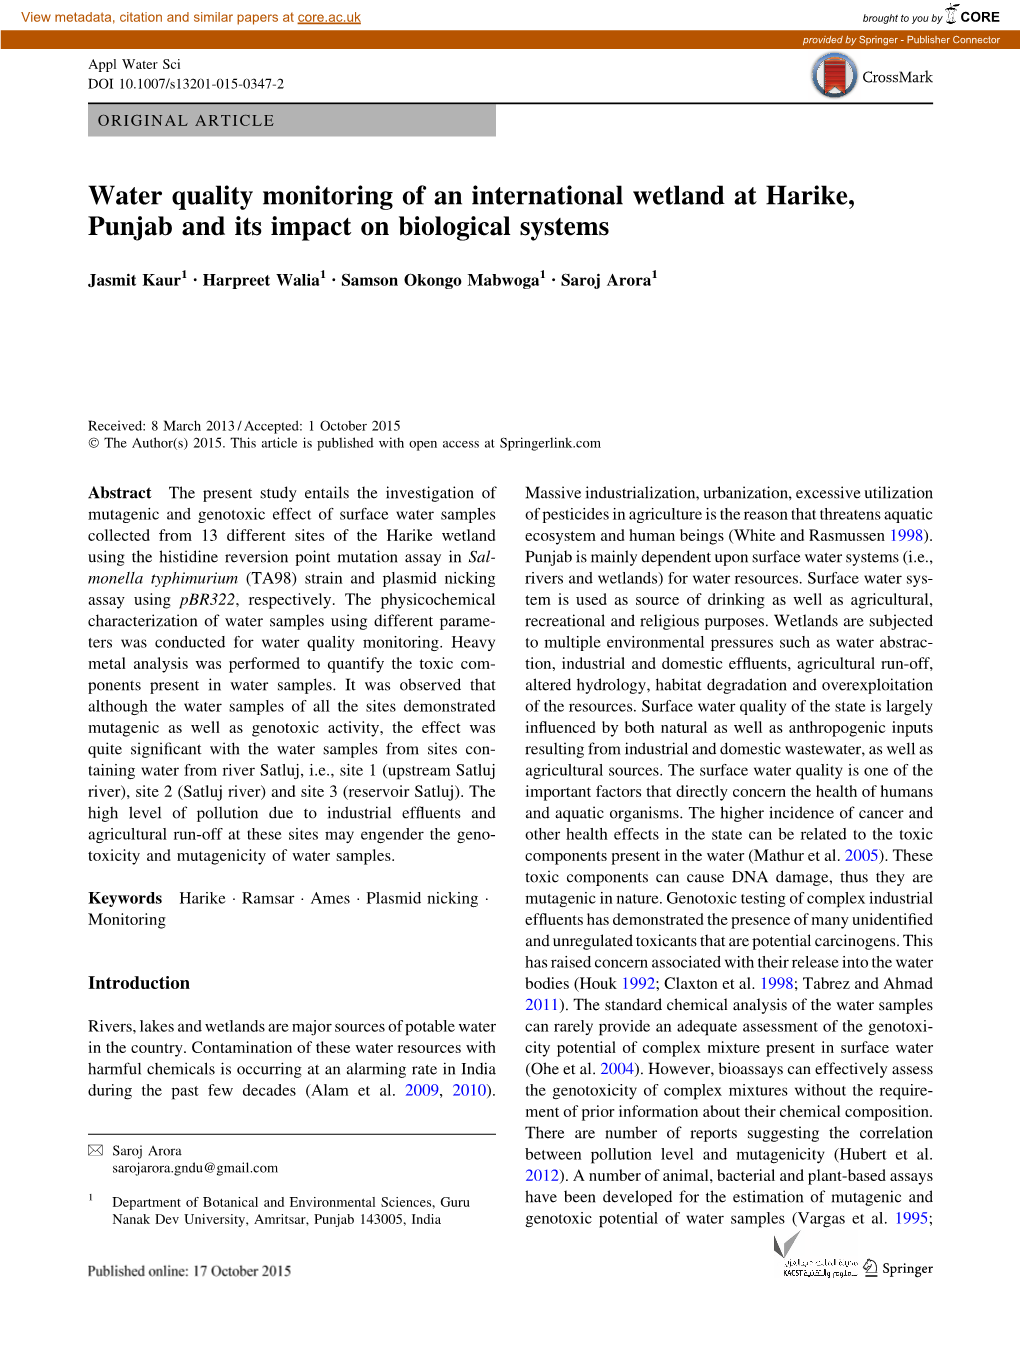 Water Quality Monitoring of an International Wetland at Harike, Punjab and Its Impact on Biological Systems